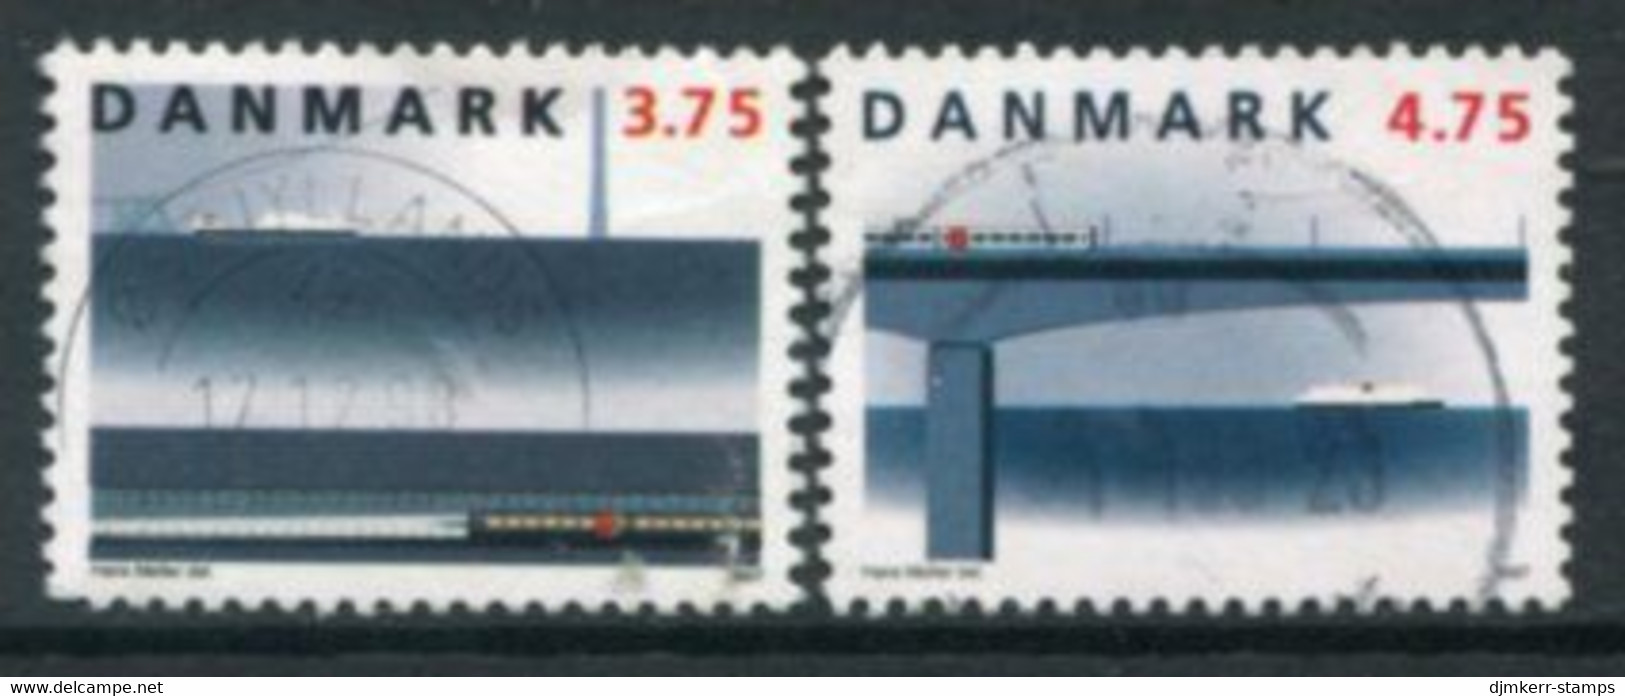 DENMARK 1997 Great Belt Railway Used.  Michel 1150-51 - Used Stamps